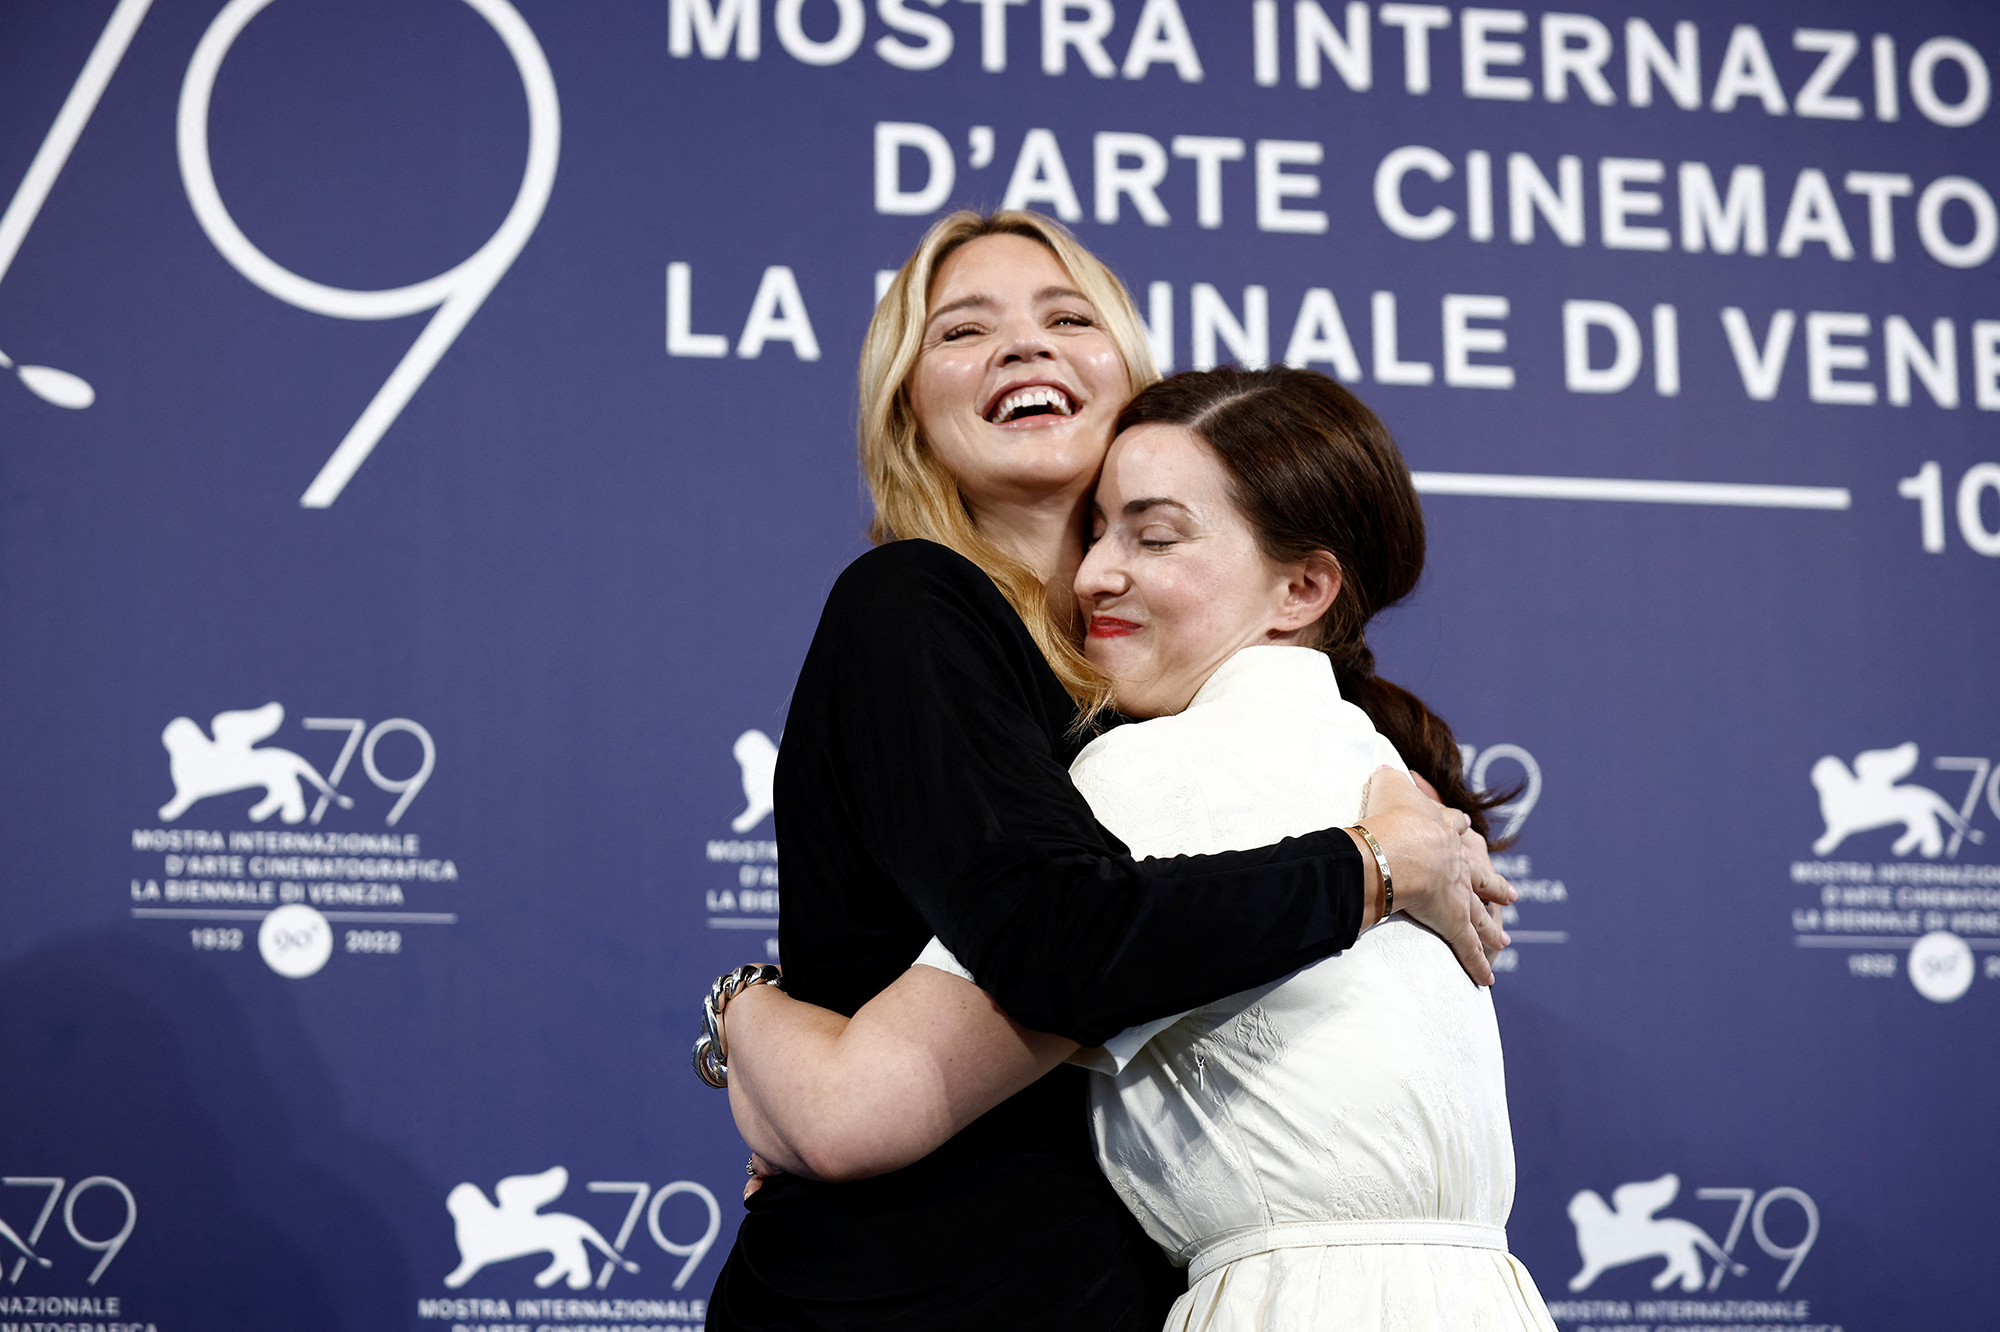 Virginie Efira shines in Venice with Rebecca Slodowski's "The Children of Others"